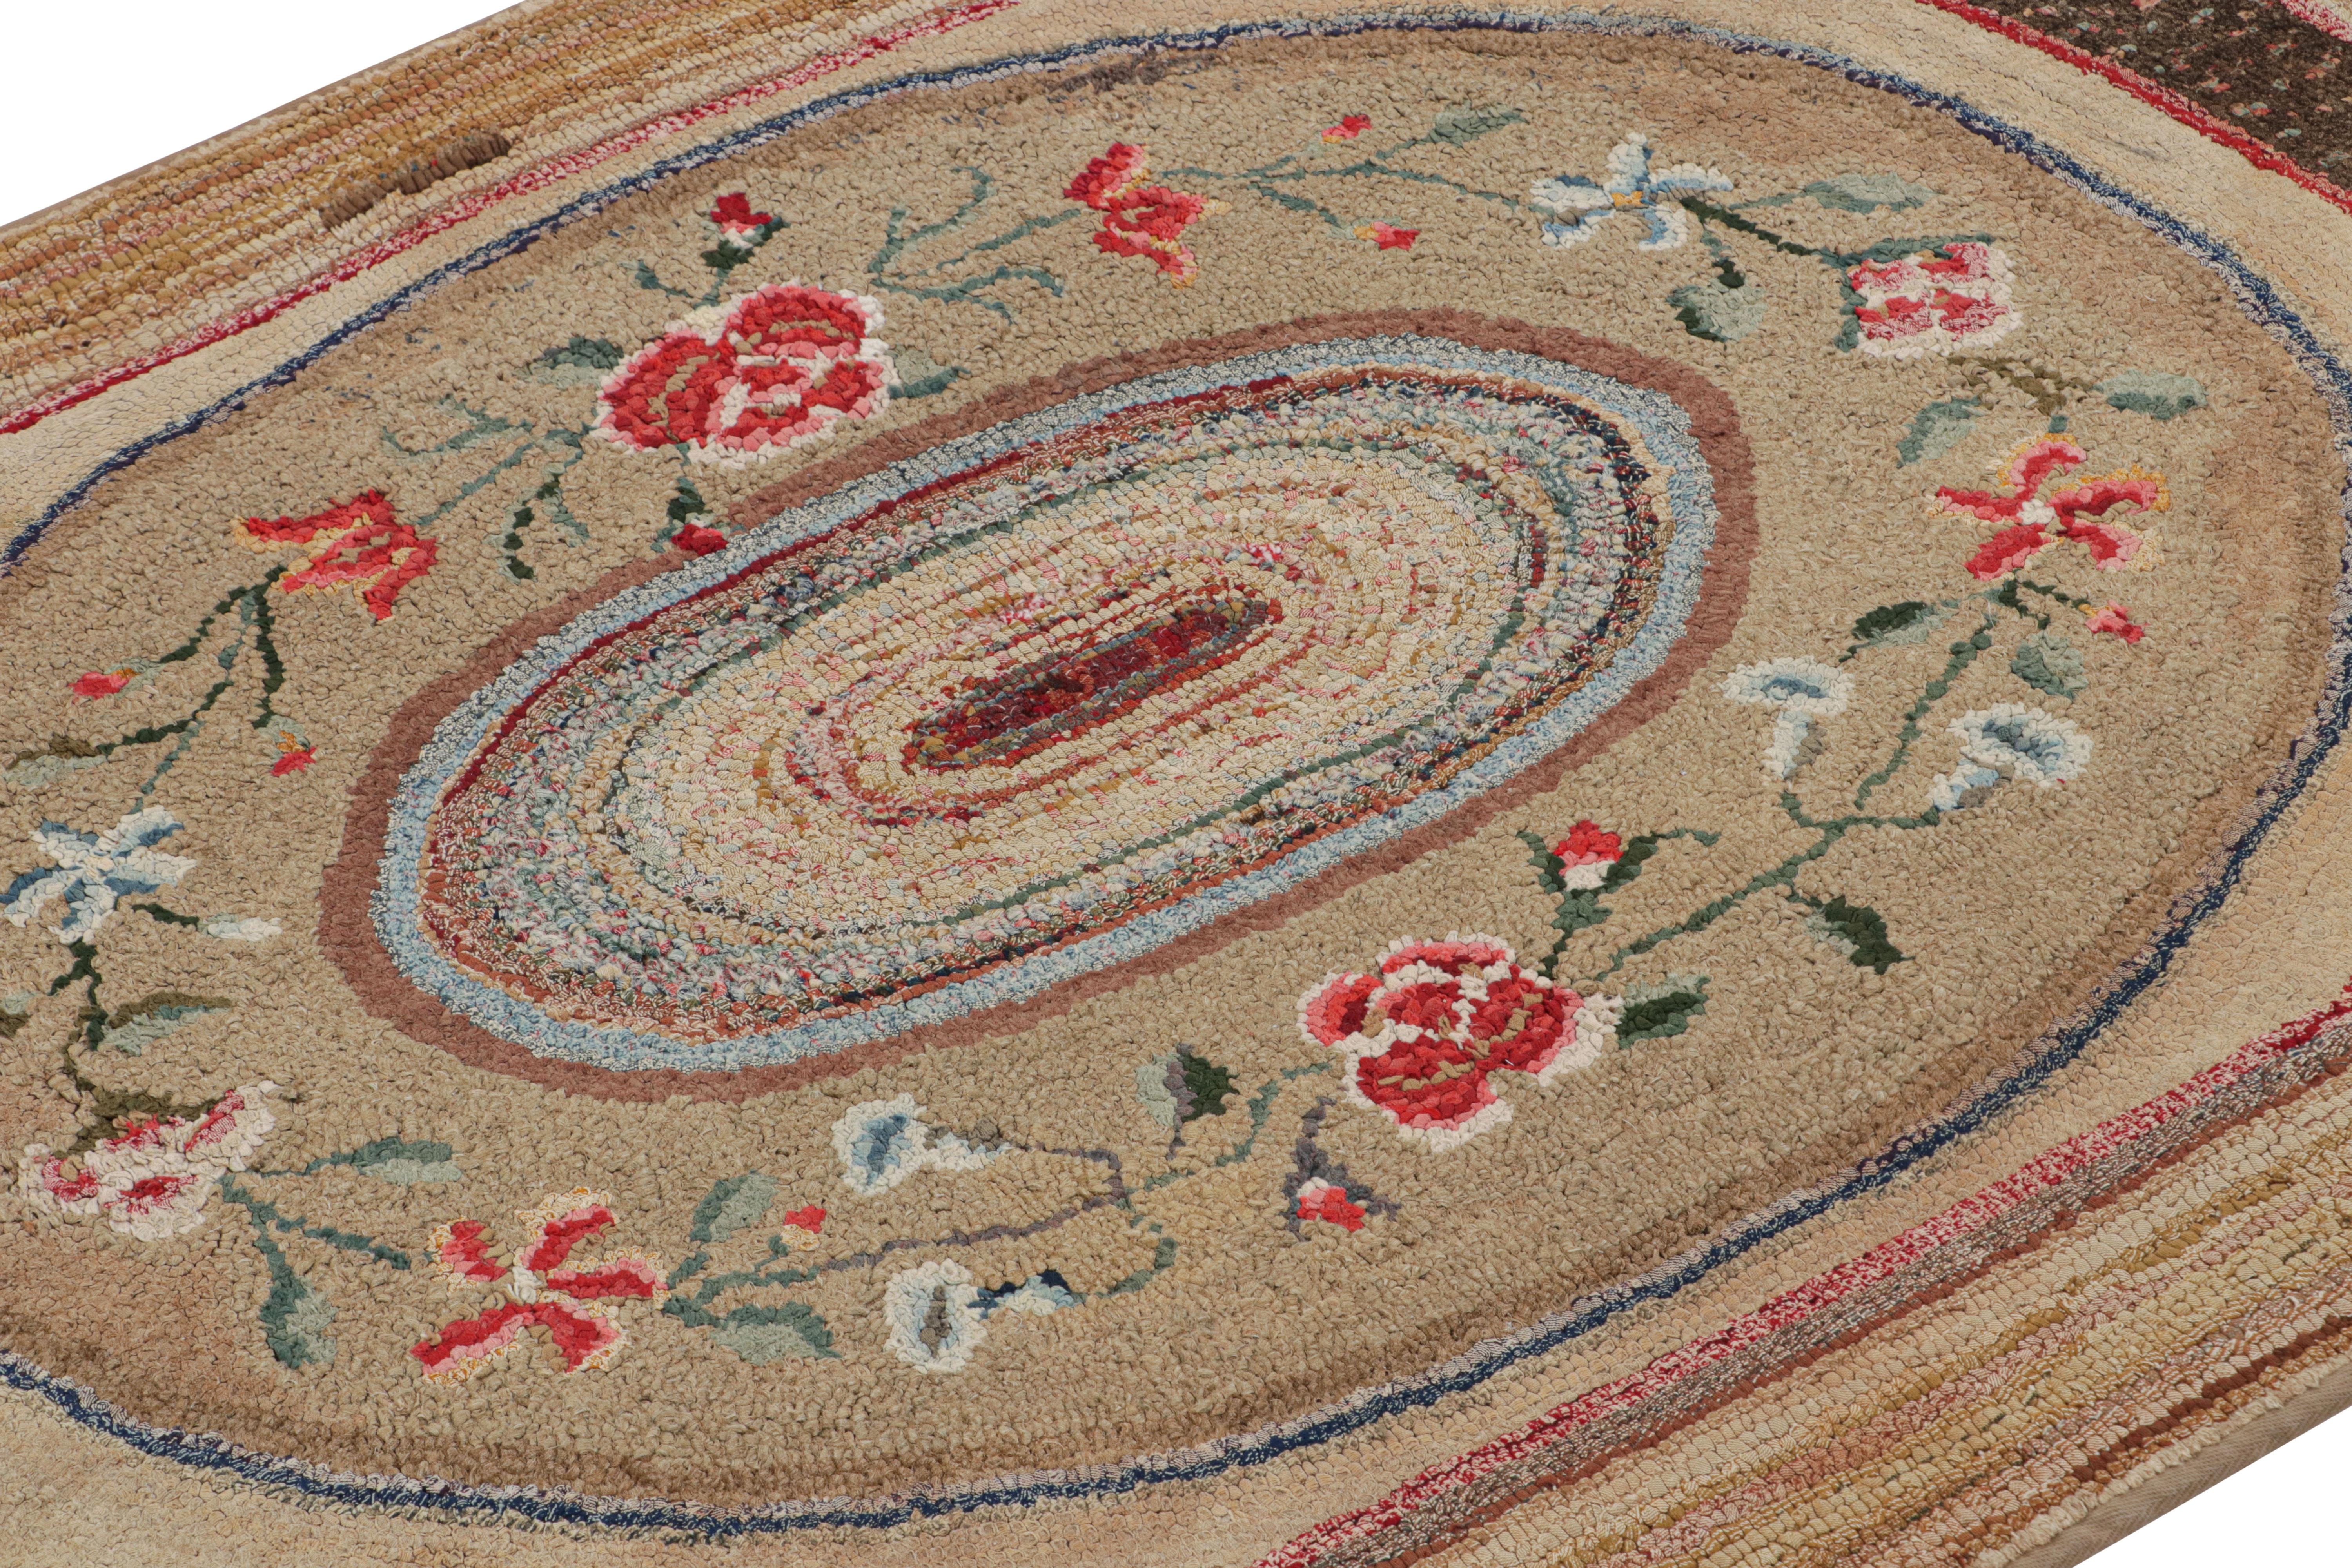 Hand-Knotted Antique Hooked Rug in Brown, with Floral Patterns, from Rug & Kilim For Sale